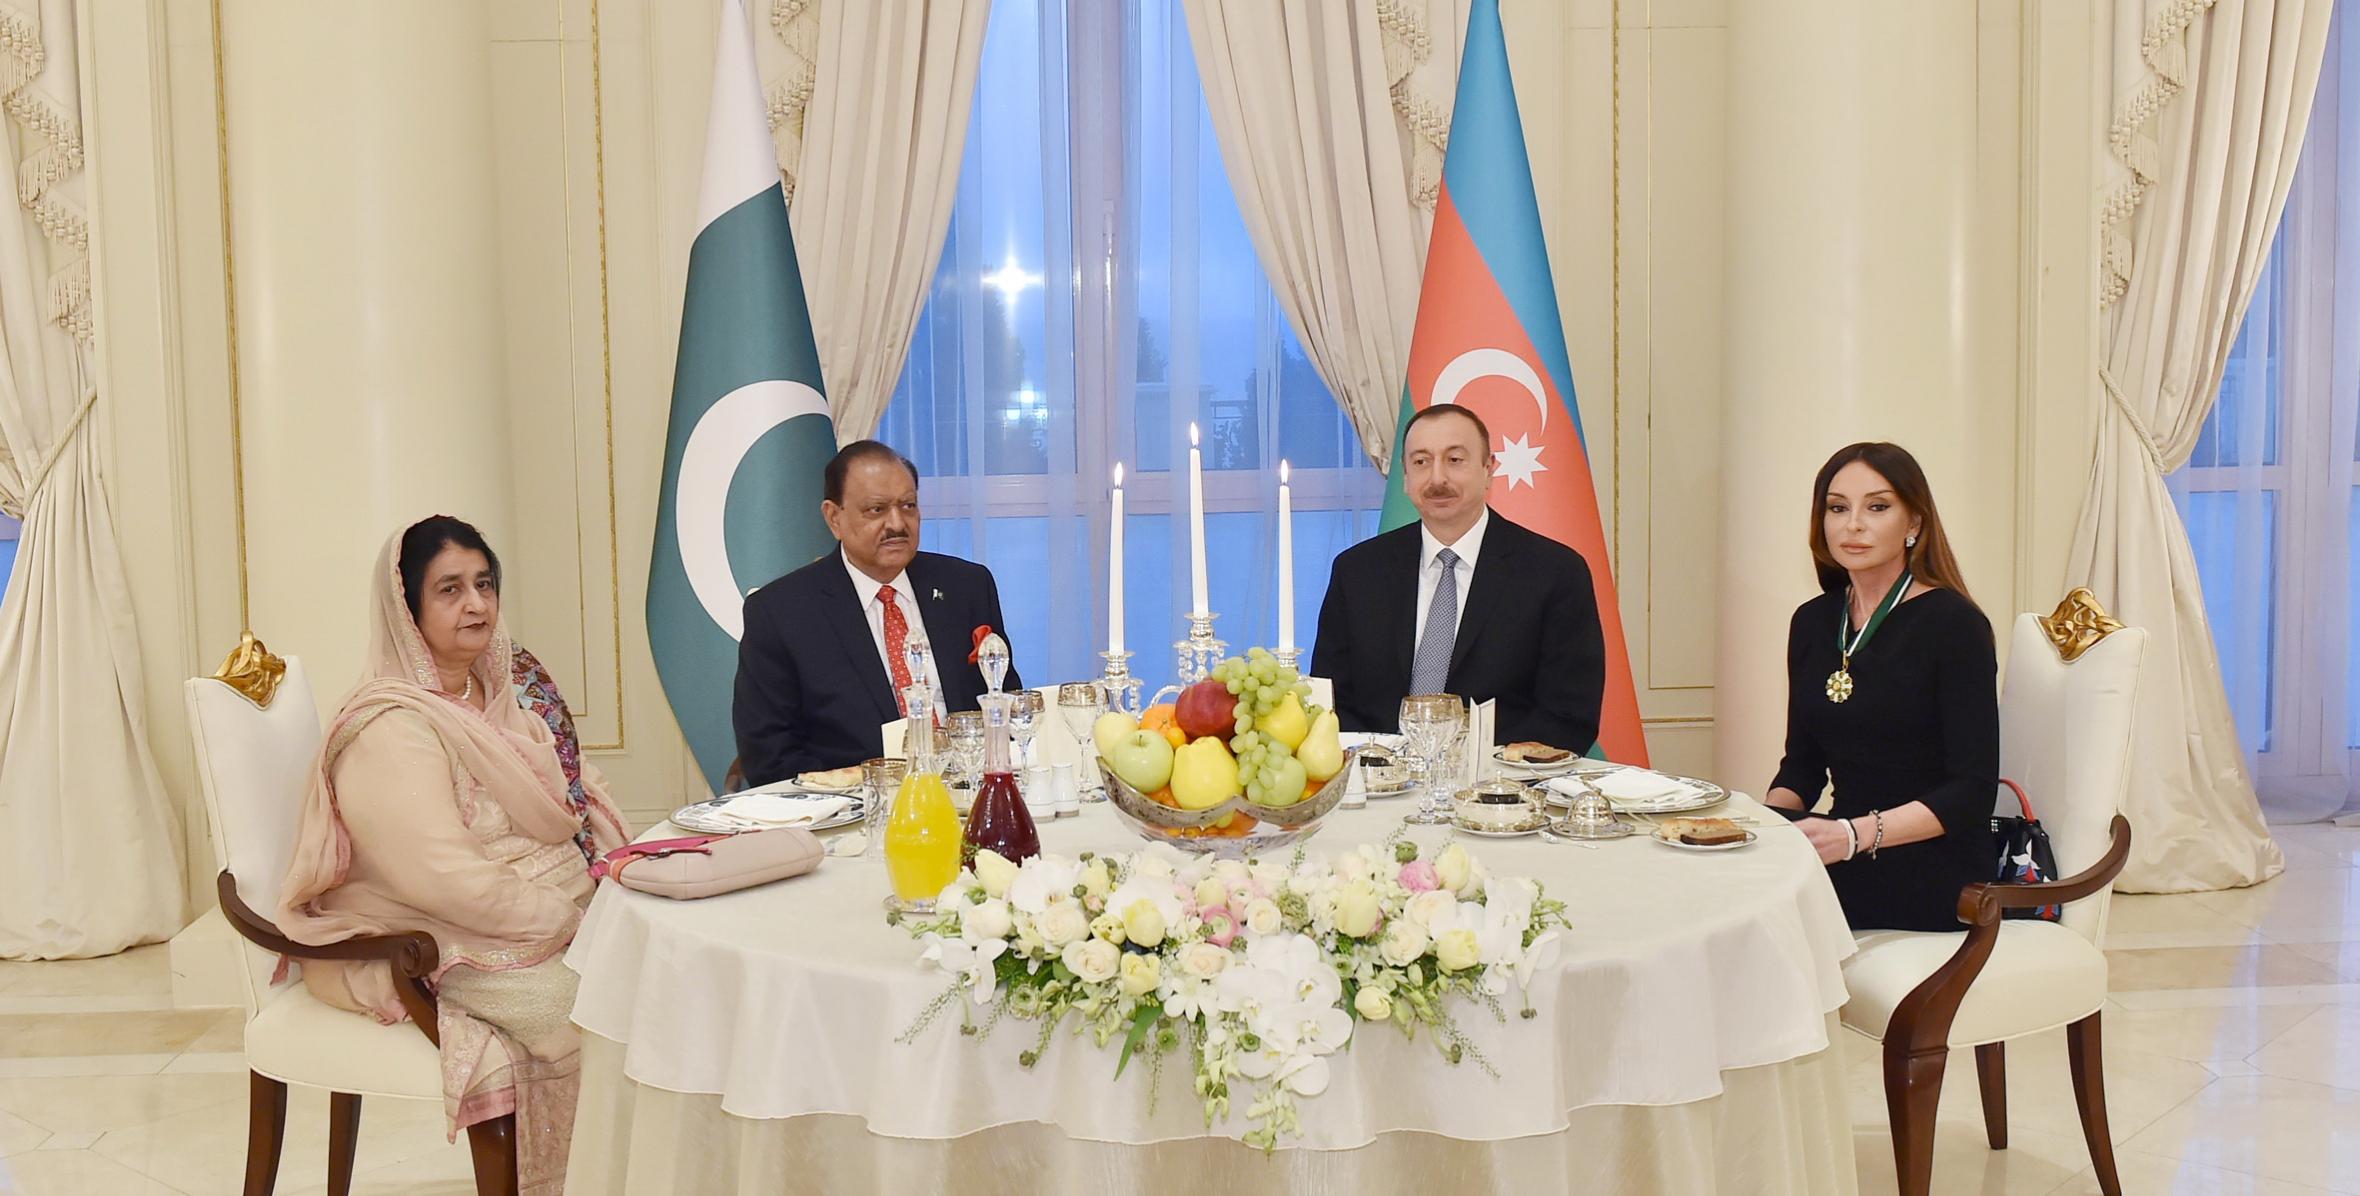 Dinner reception was hosted on behalf of President Ilham Aliyev in honor of President Mamnoon Hussain